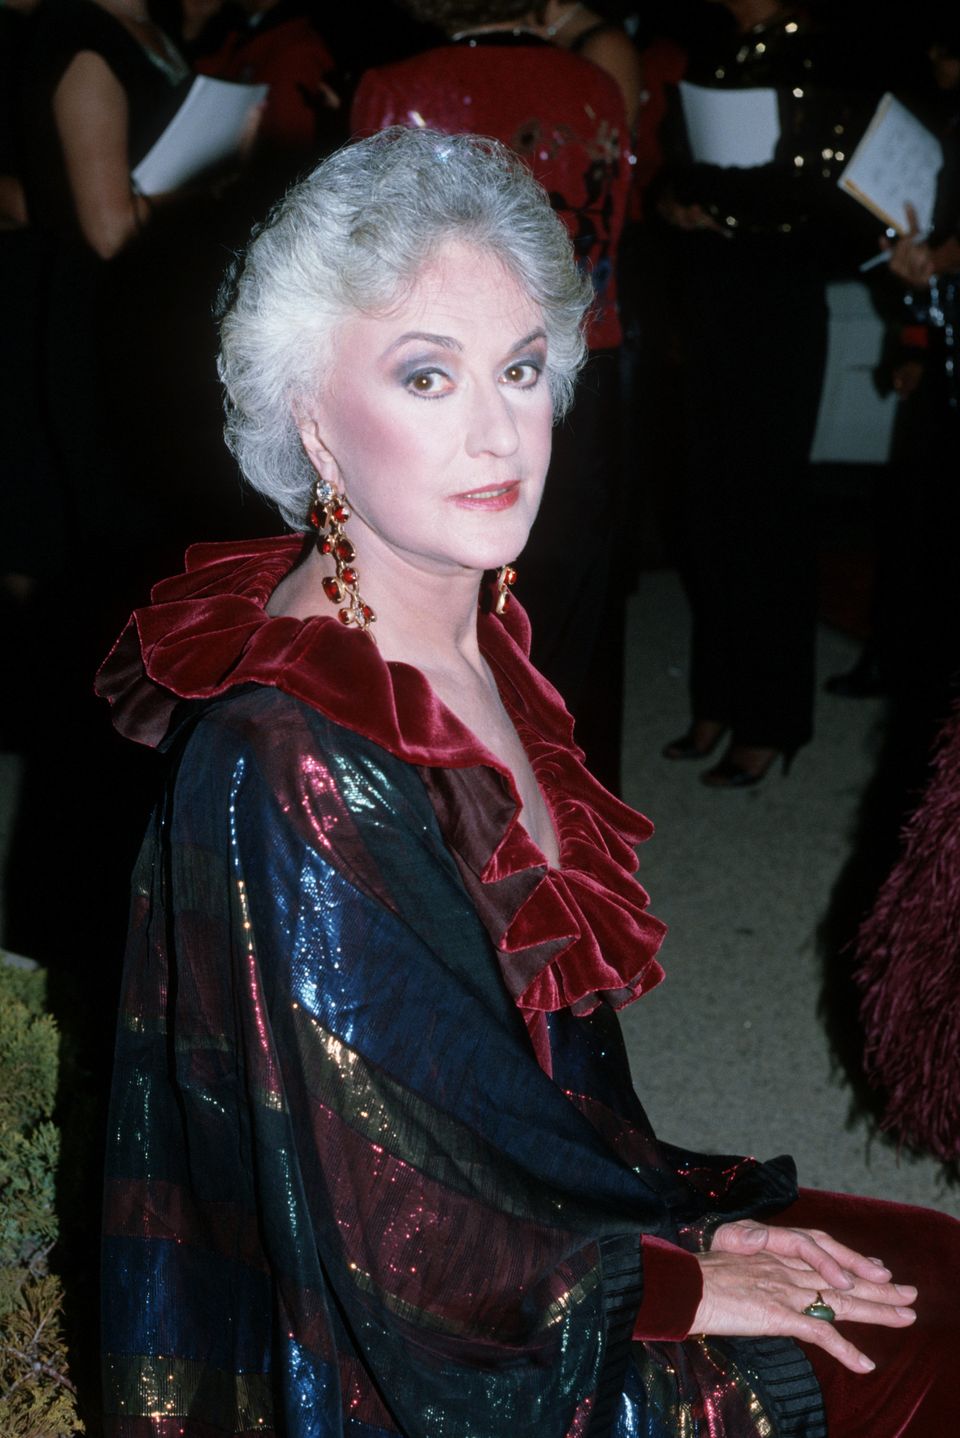 This Is What The Emmy Awards Looked Like In 1986 | HuffPost Entertainment